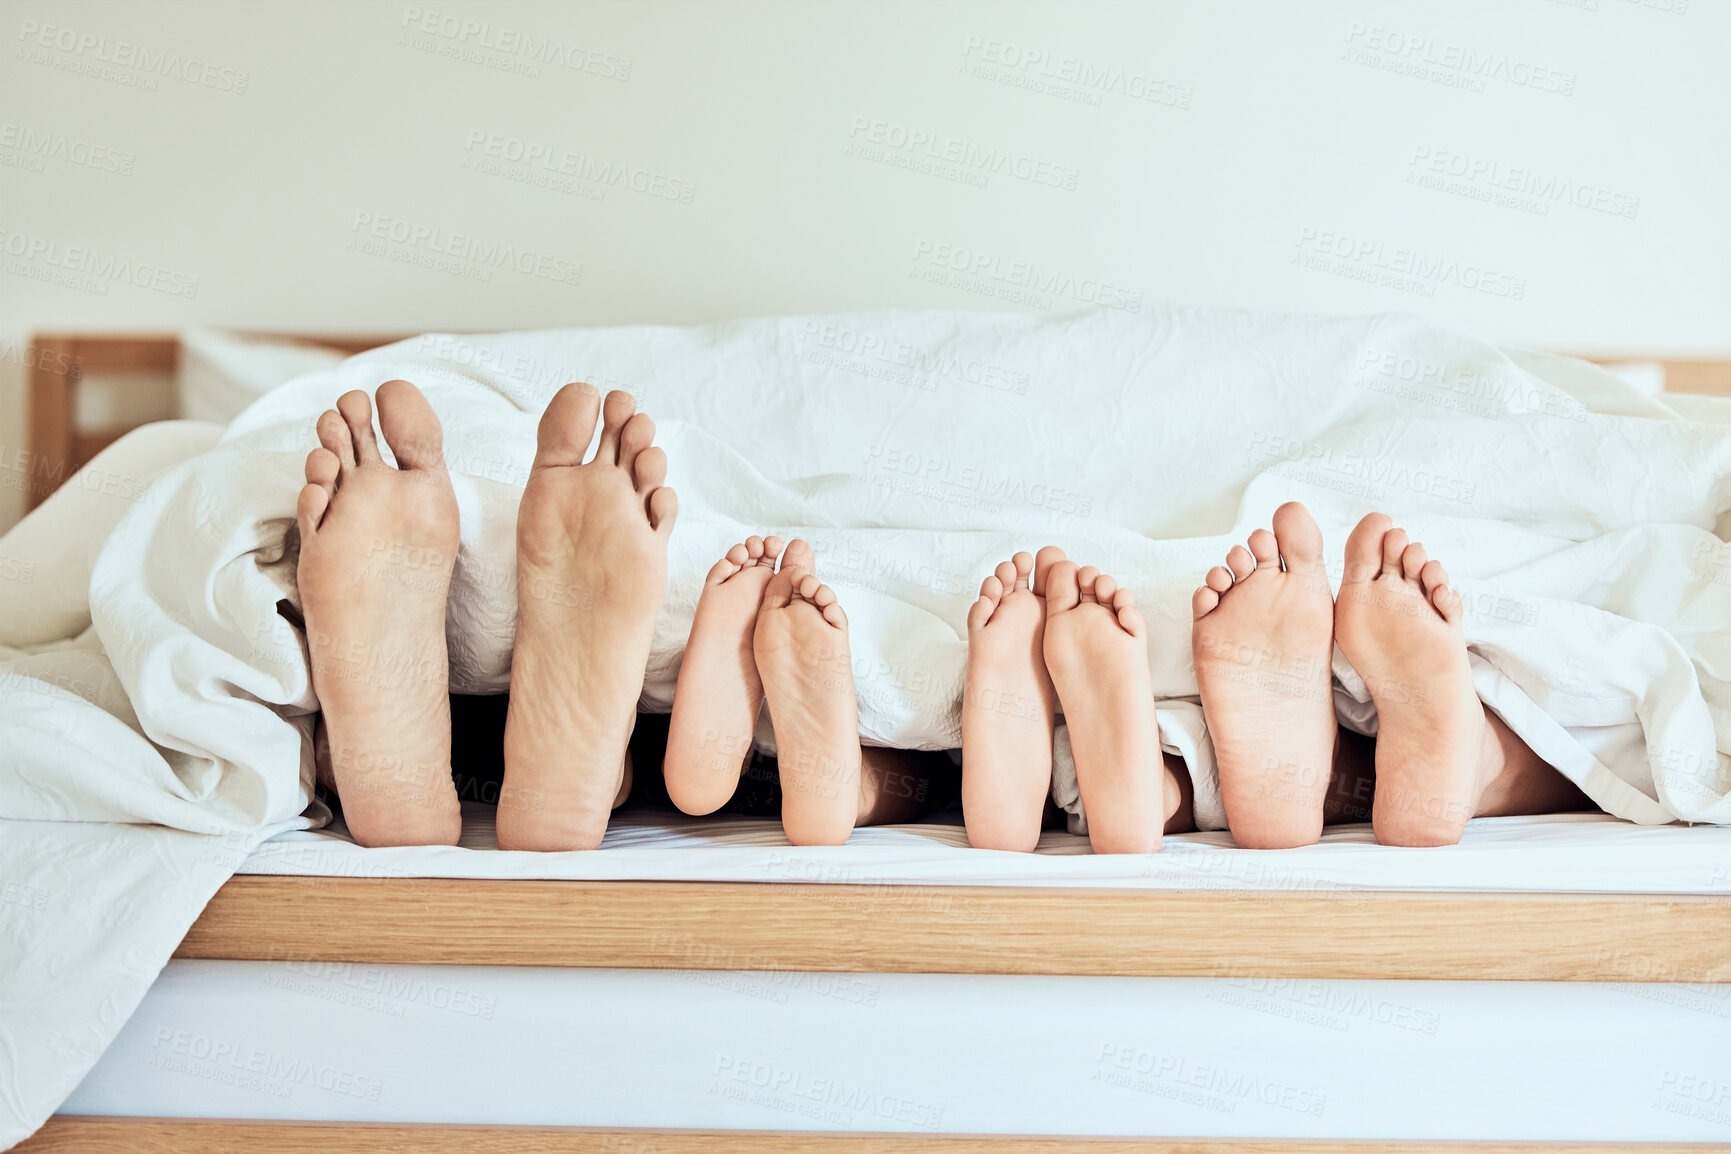 Buy stock photo Closeup of feet of family lying in bed. Bare feet of parents and children sticking out in bed. Family with two children relaxing in bed together. Kids sleeping in bed with their parents